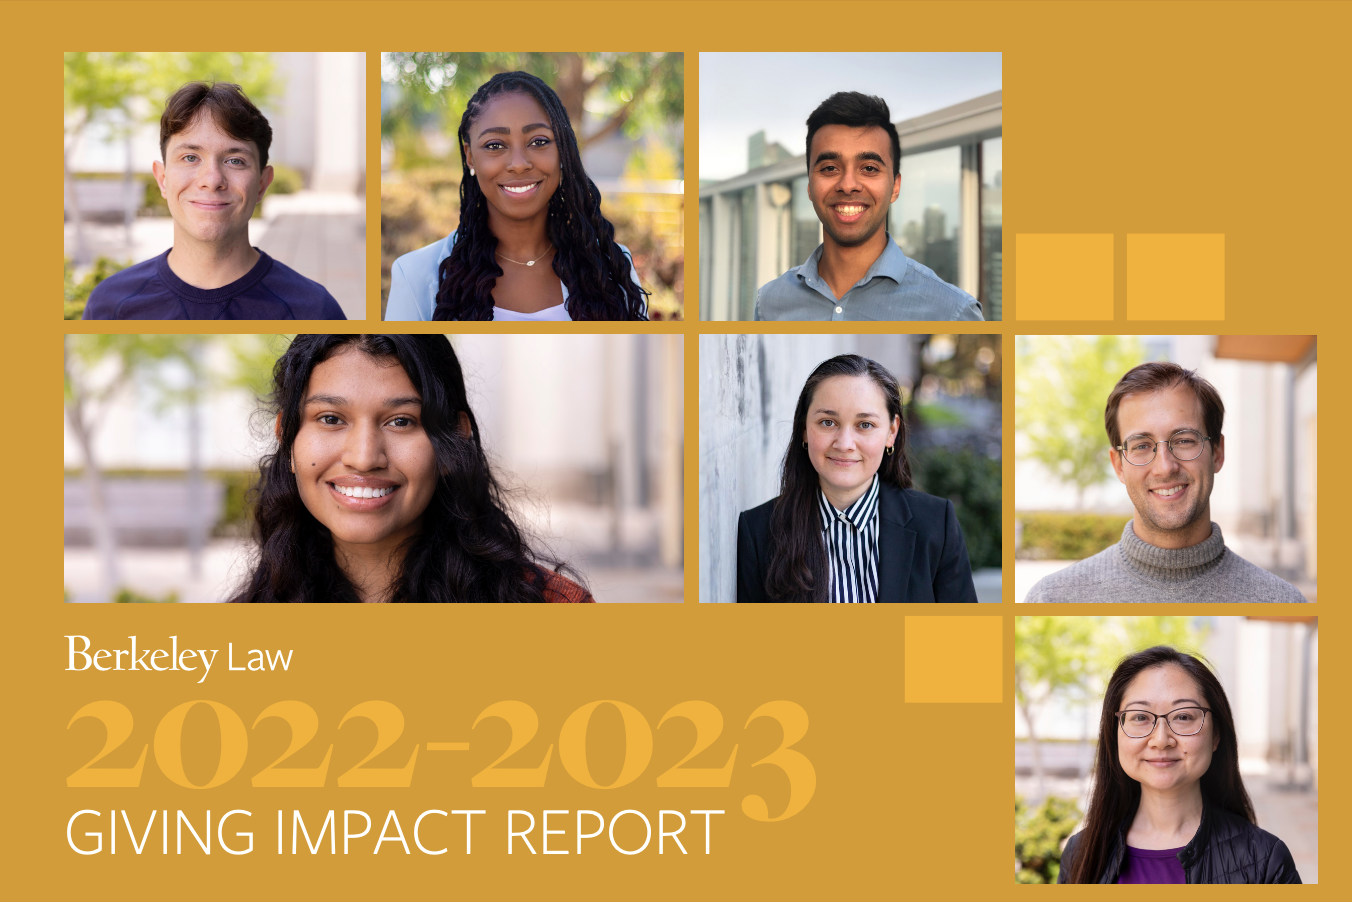 Giving Impact Report 2022-2023